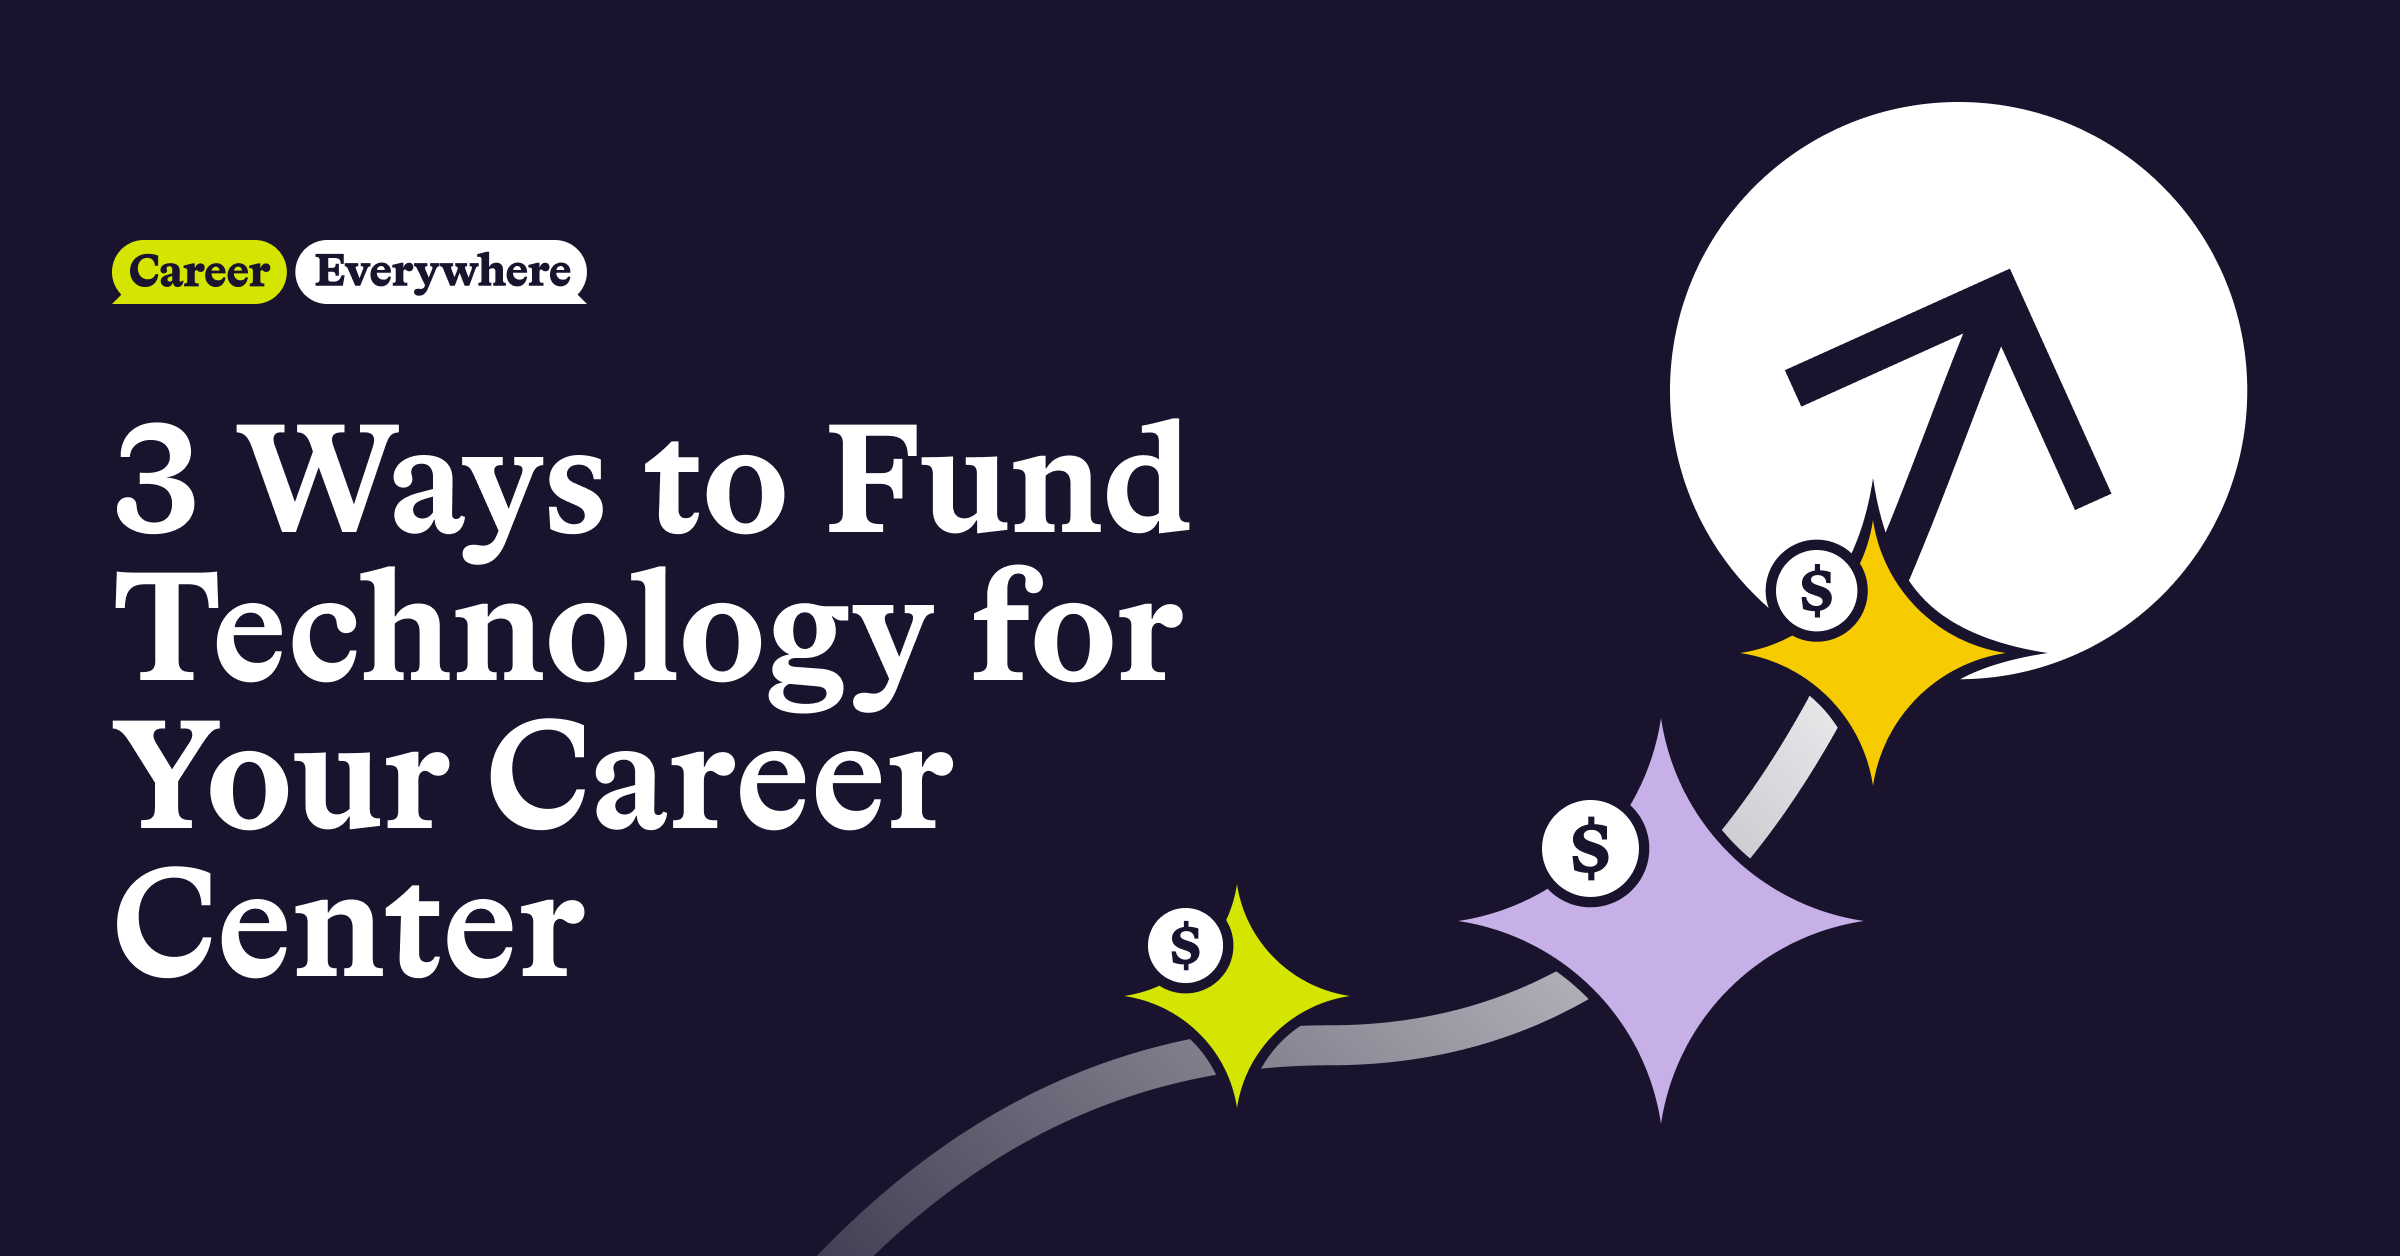 3 Ways to Fund Technology for Your Career Center